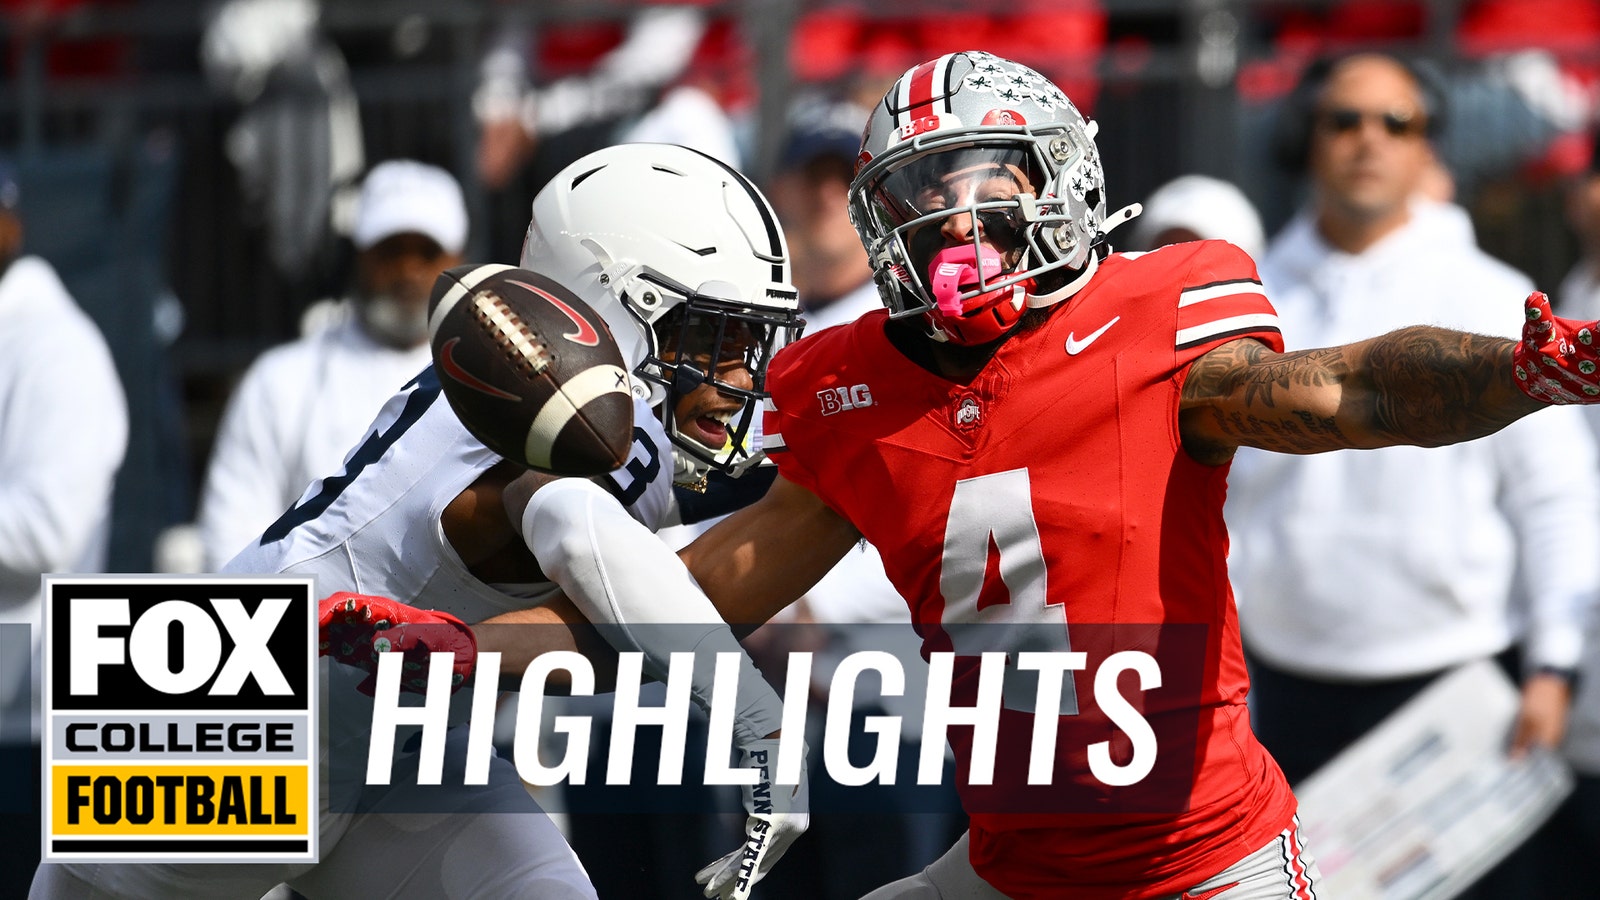 Highlights: Watch all the big plays from Ohio State vs. Penn State